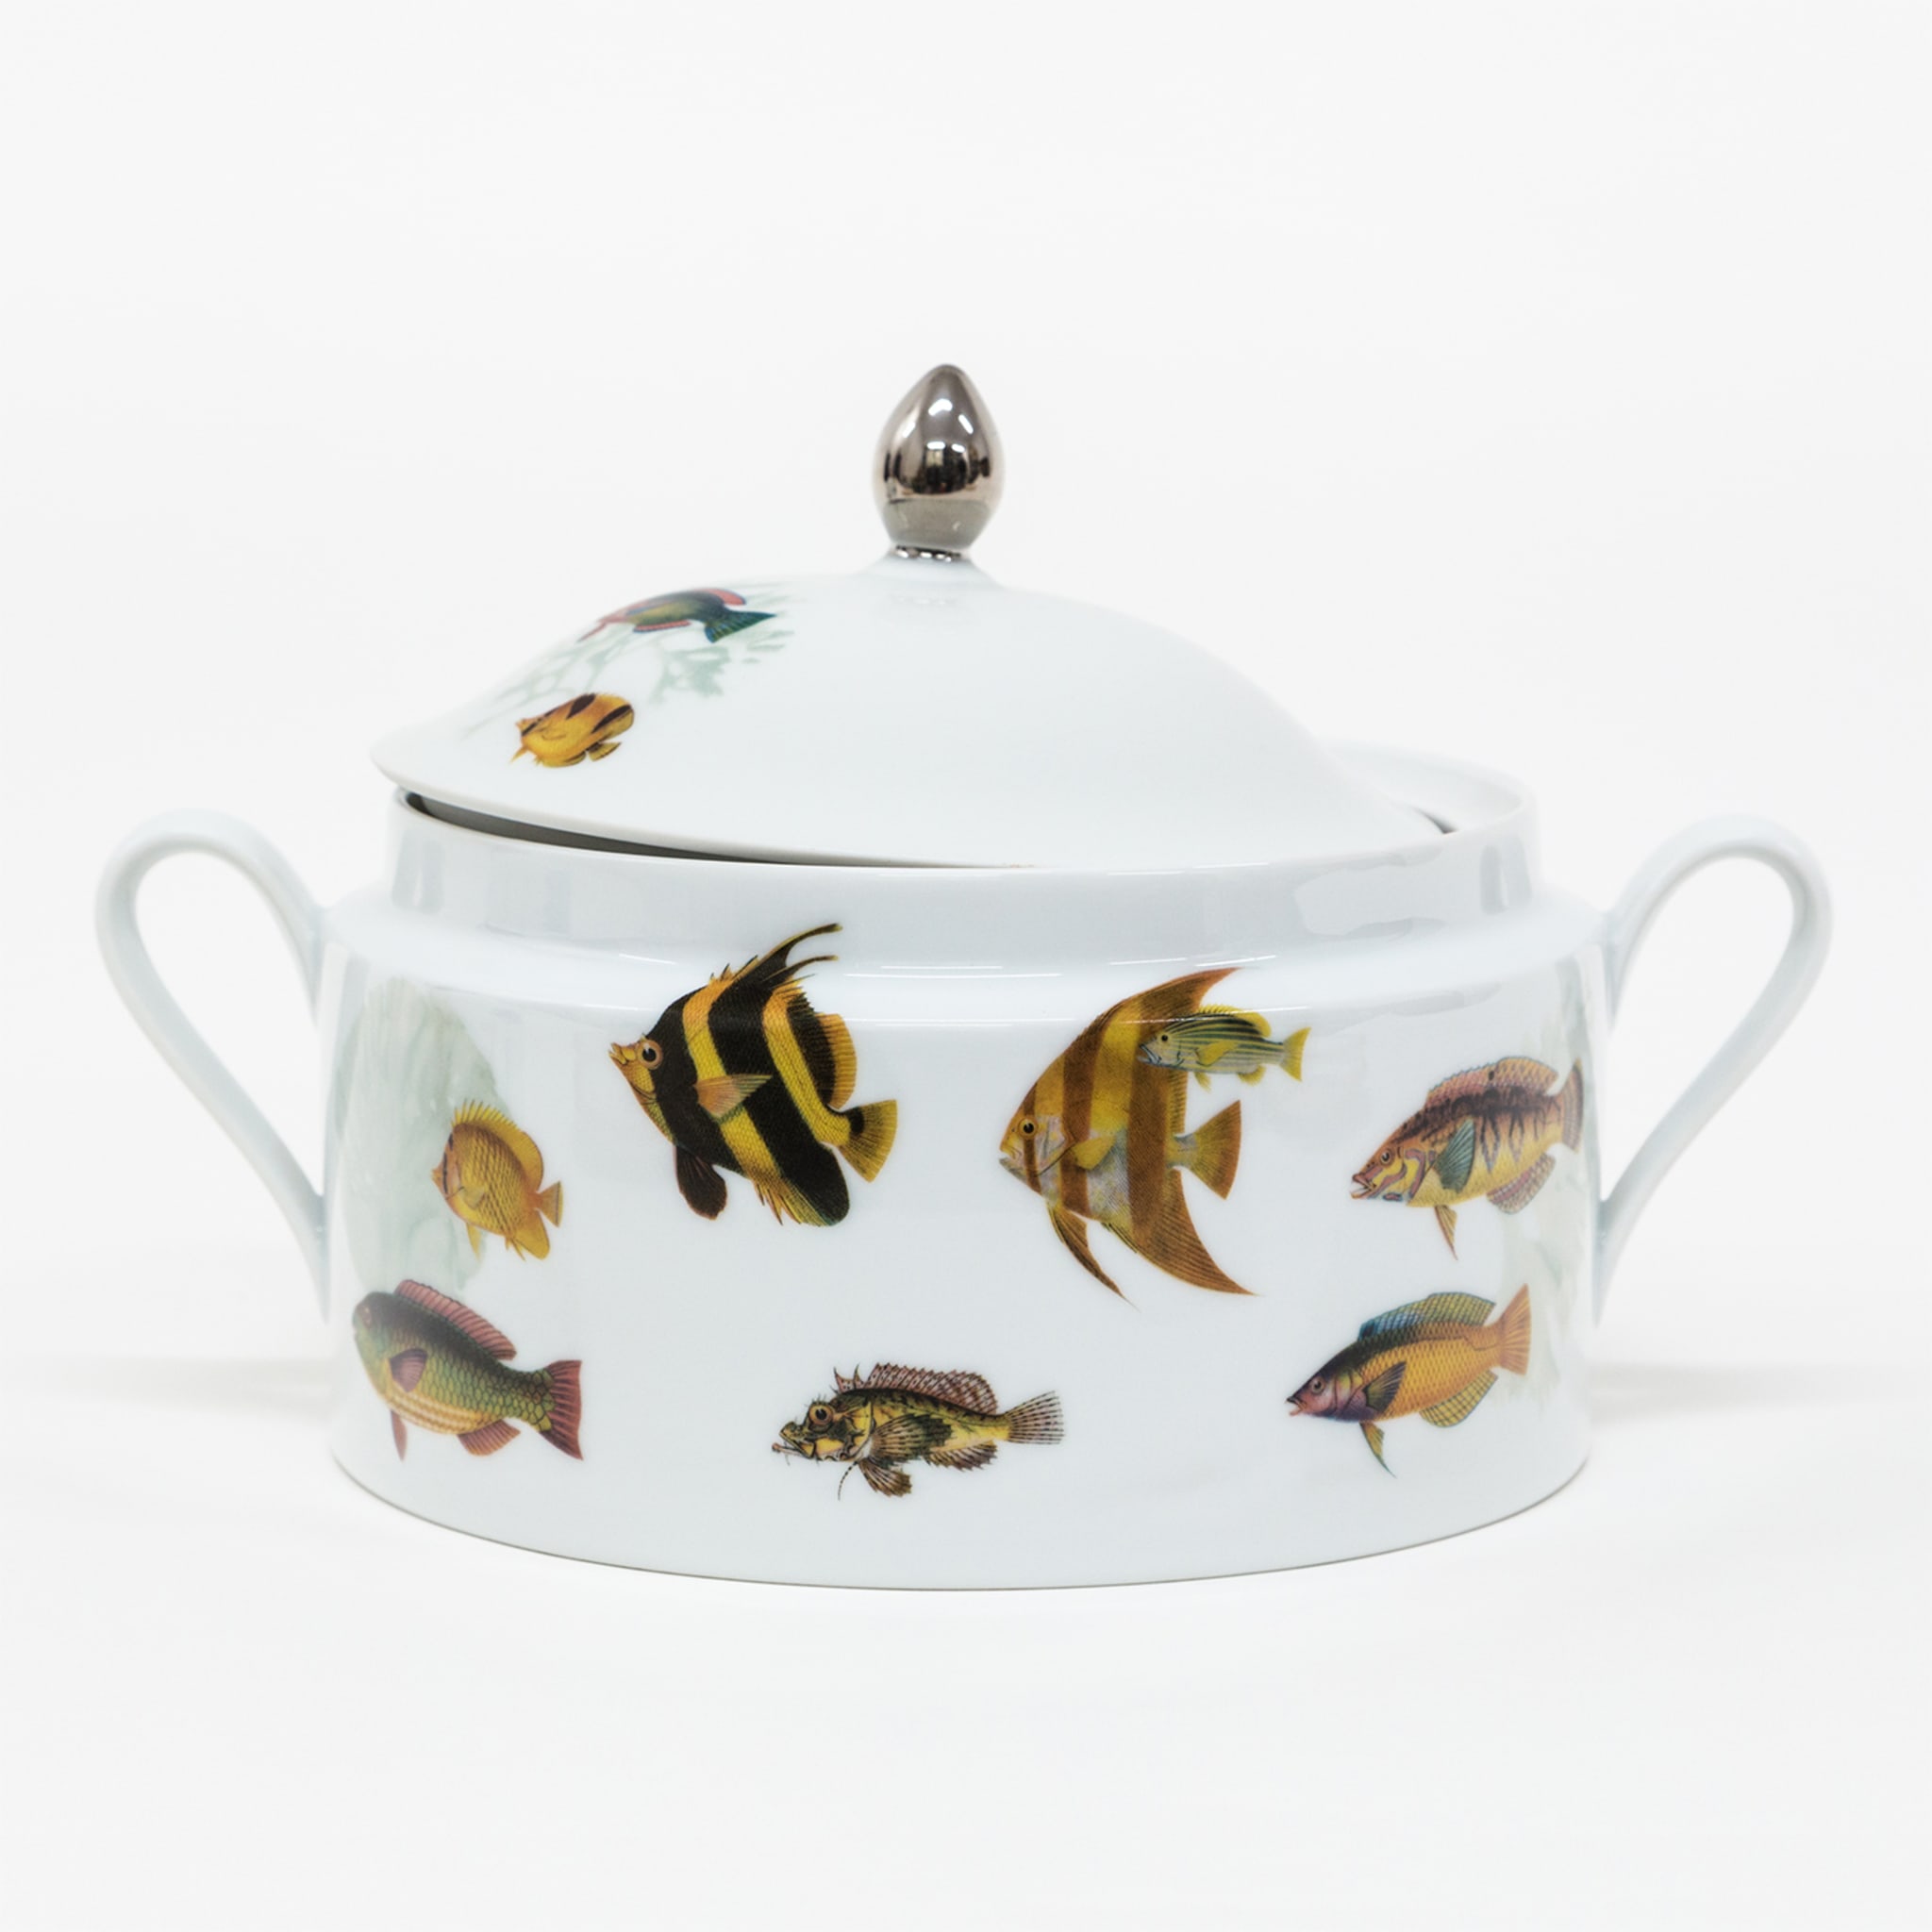 Amami Porcelain Tureen With Tropical Fish - Alternative view 1